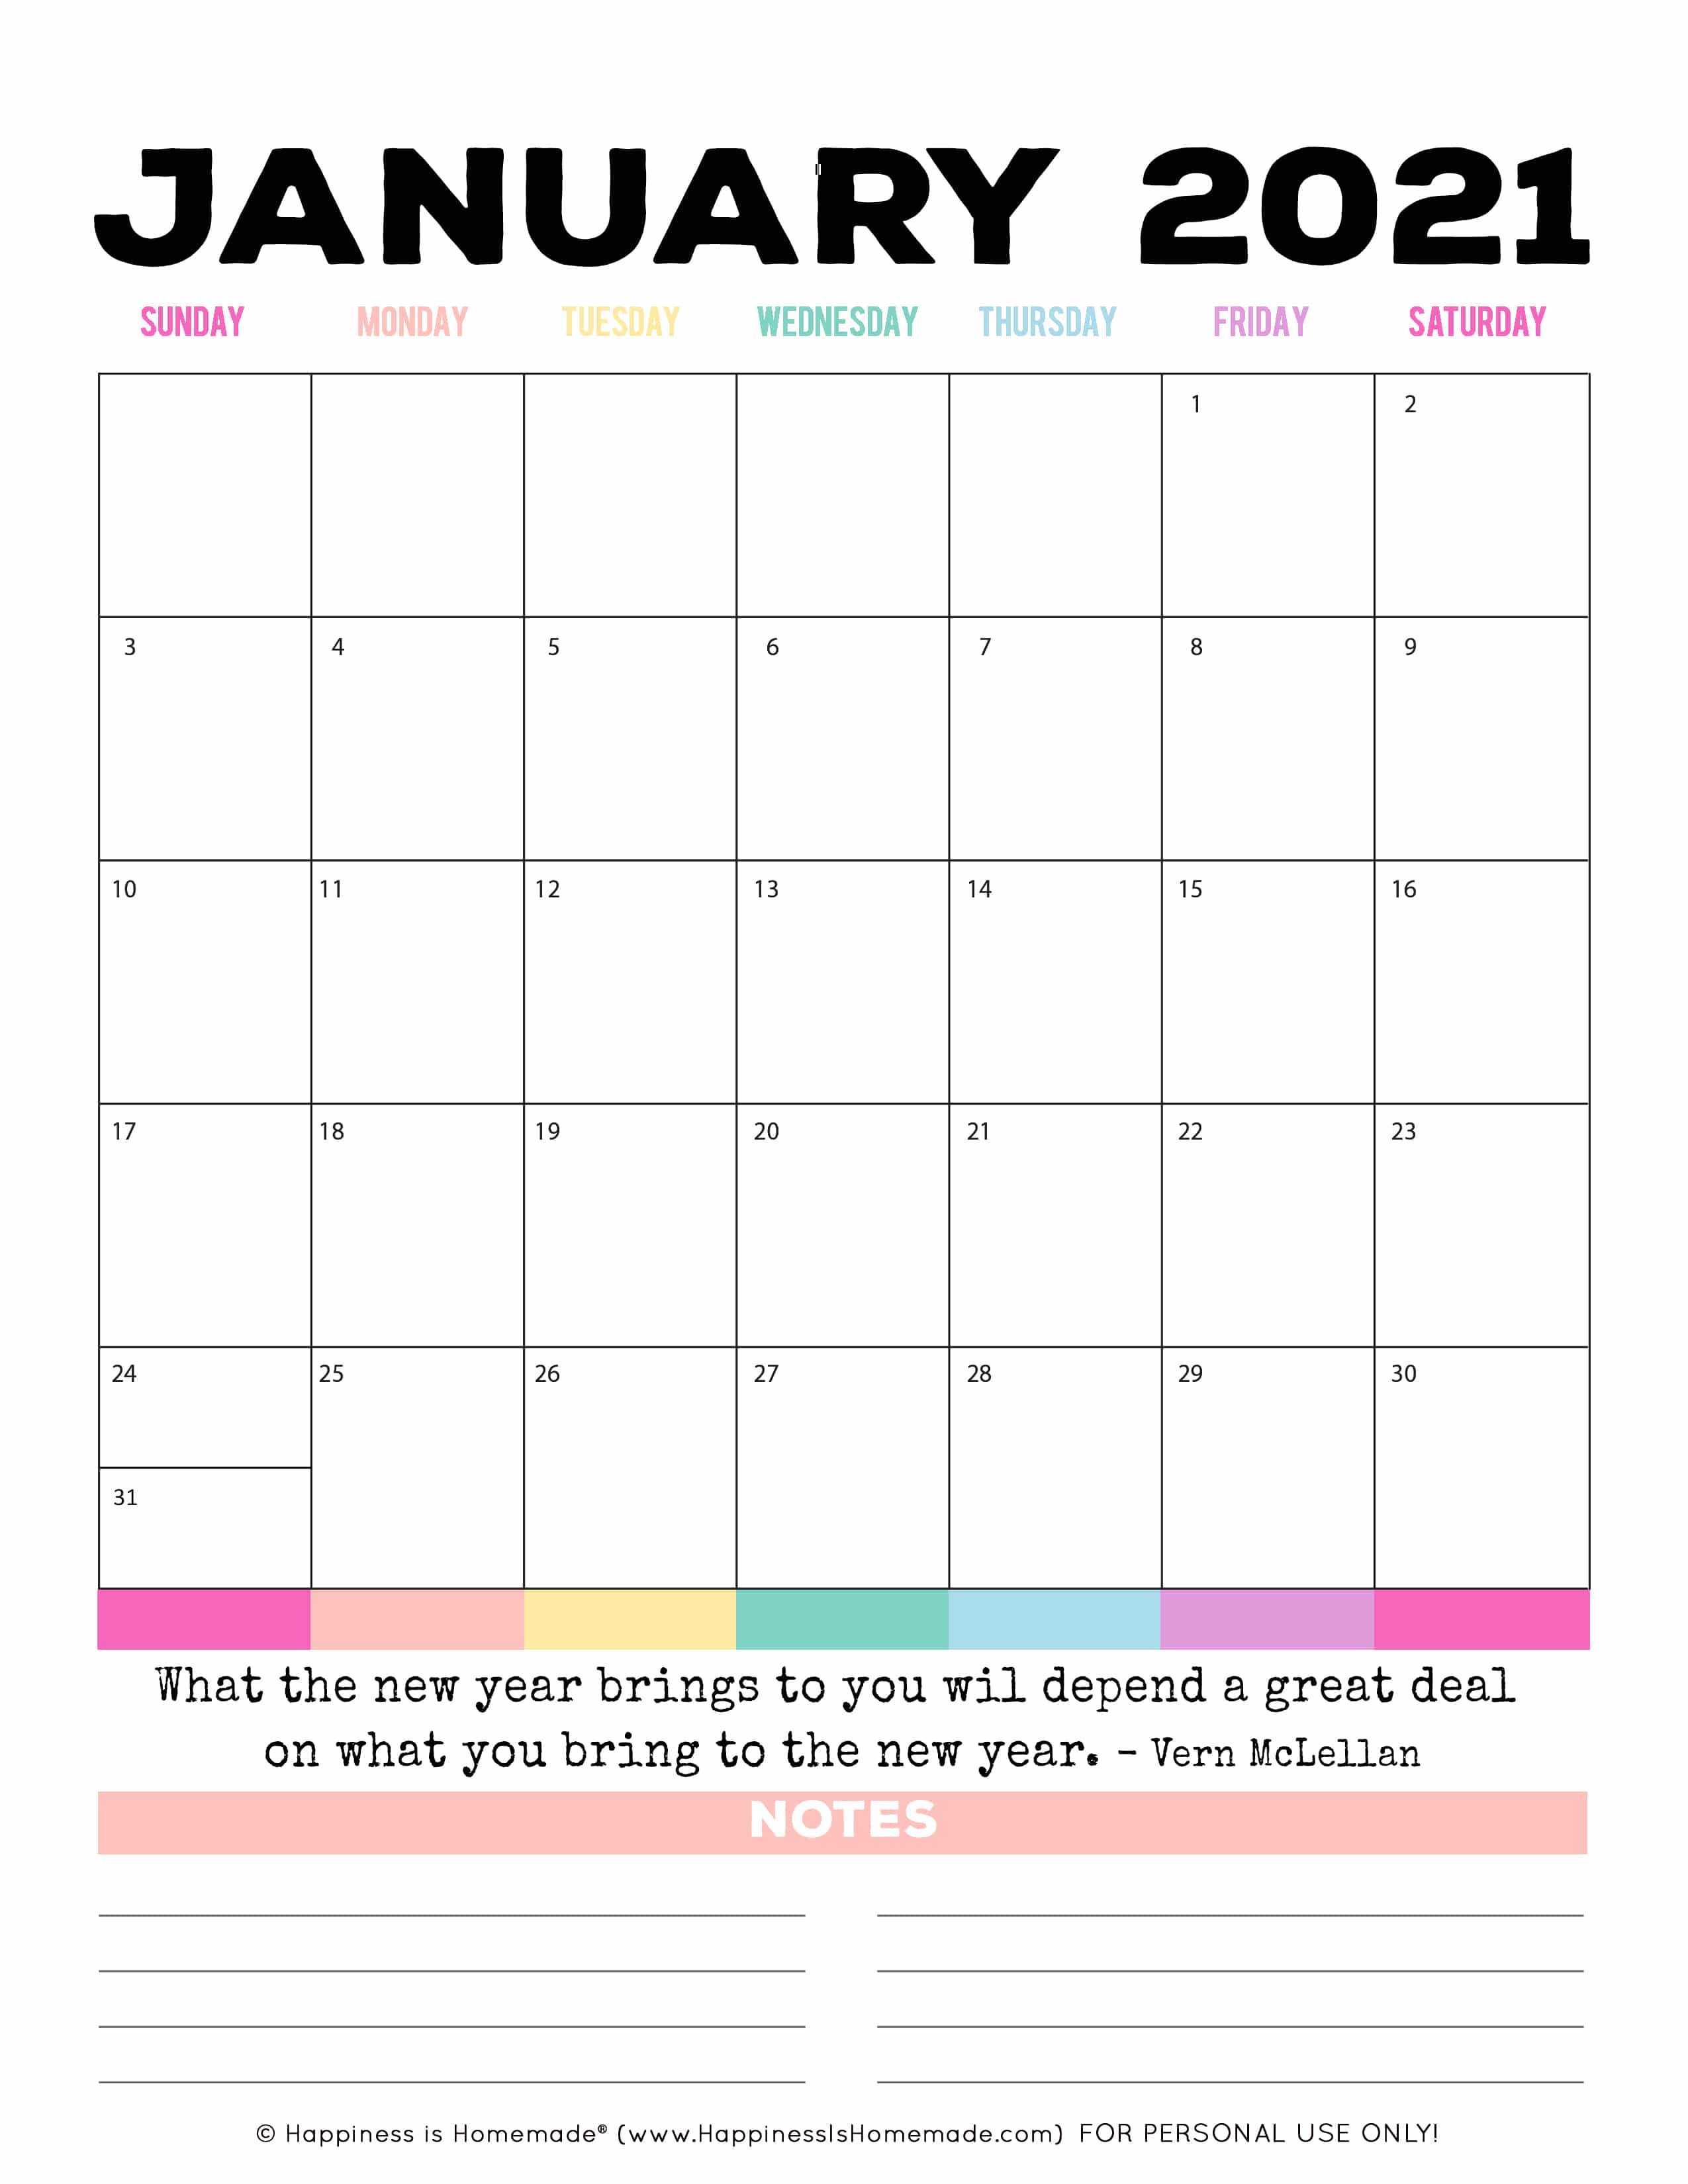 2020 - 2021 Free Printable Monthly Calendar - Happiness is ...